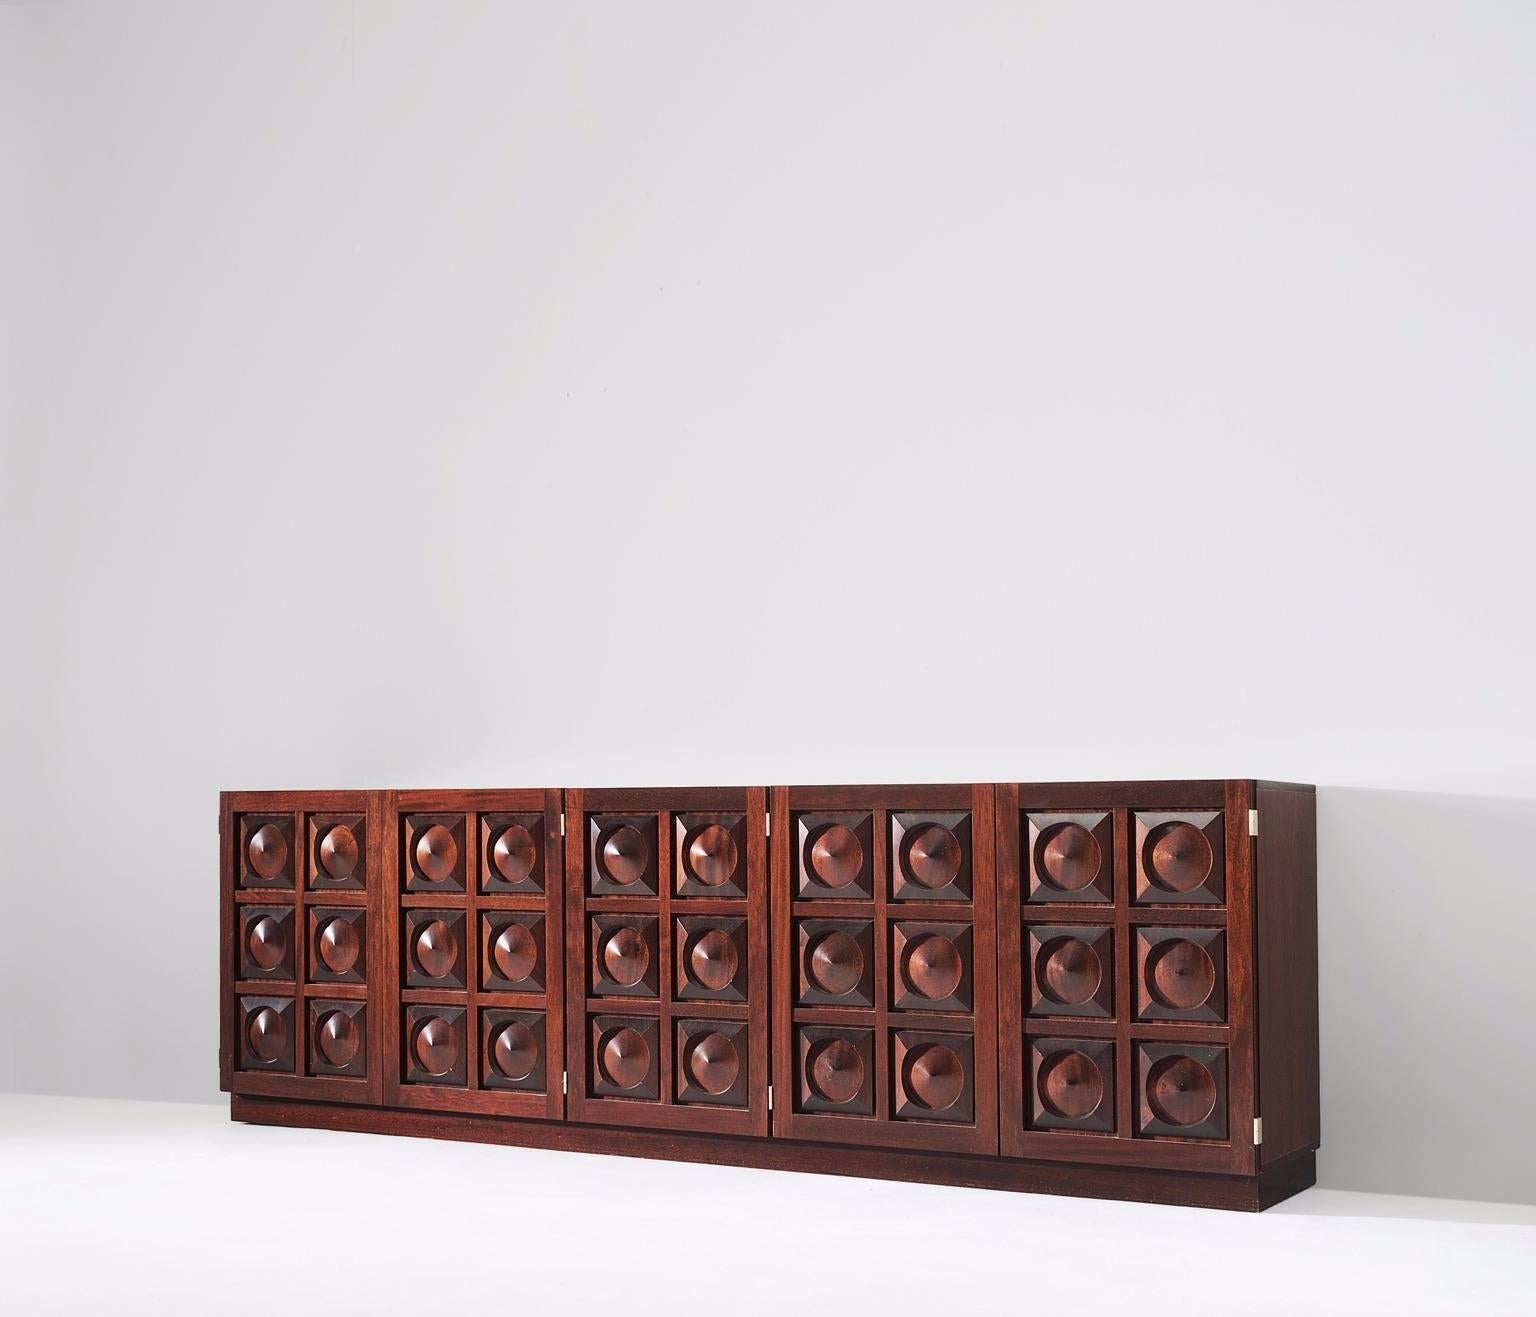 Brown Brutalist credenza in mahogany, European 1970s. 

Sturdy credenza in mahogany with graphical designed door panels. Five-door panels, each with a three-dimensional pattern of circles and squares, which gives the cabinet a very strong